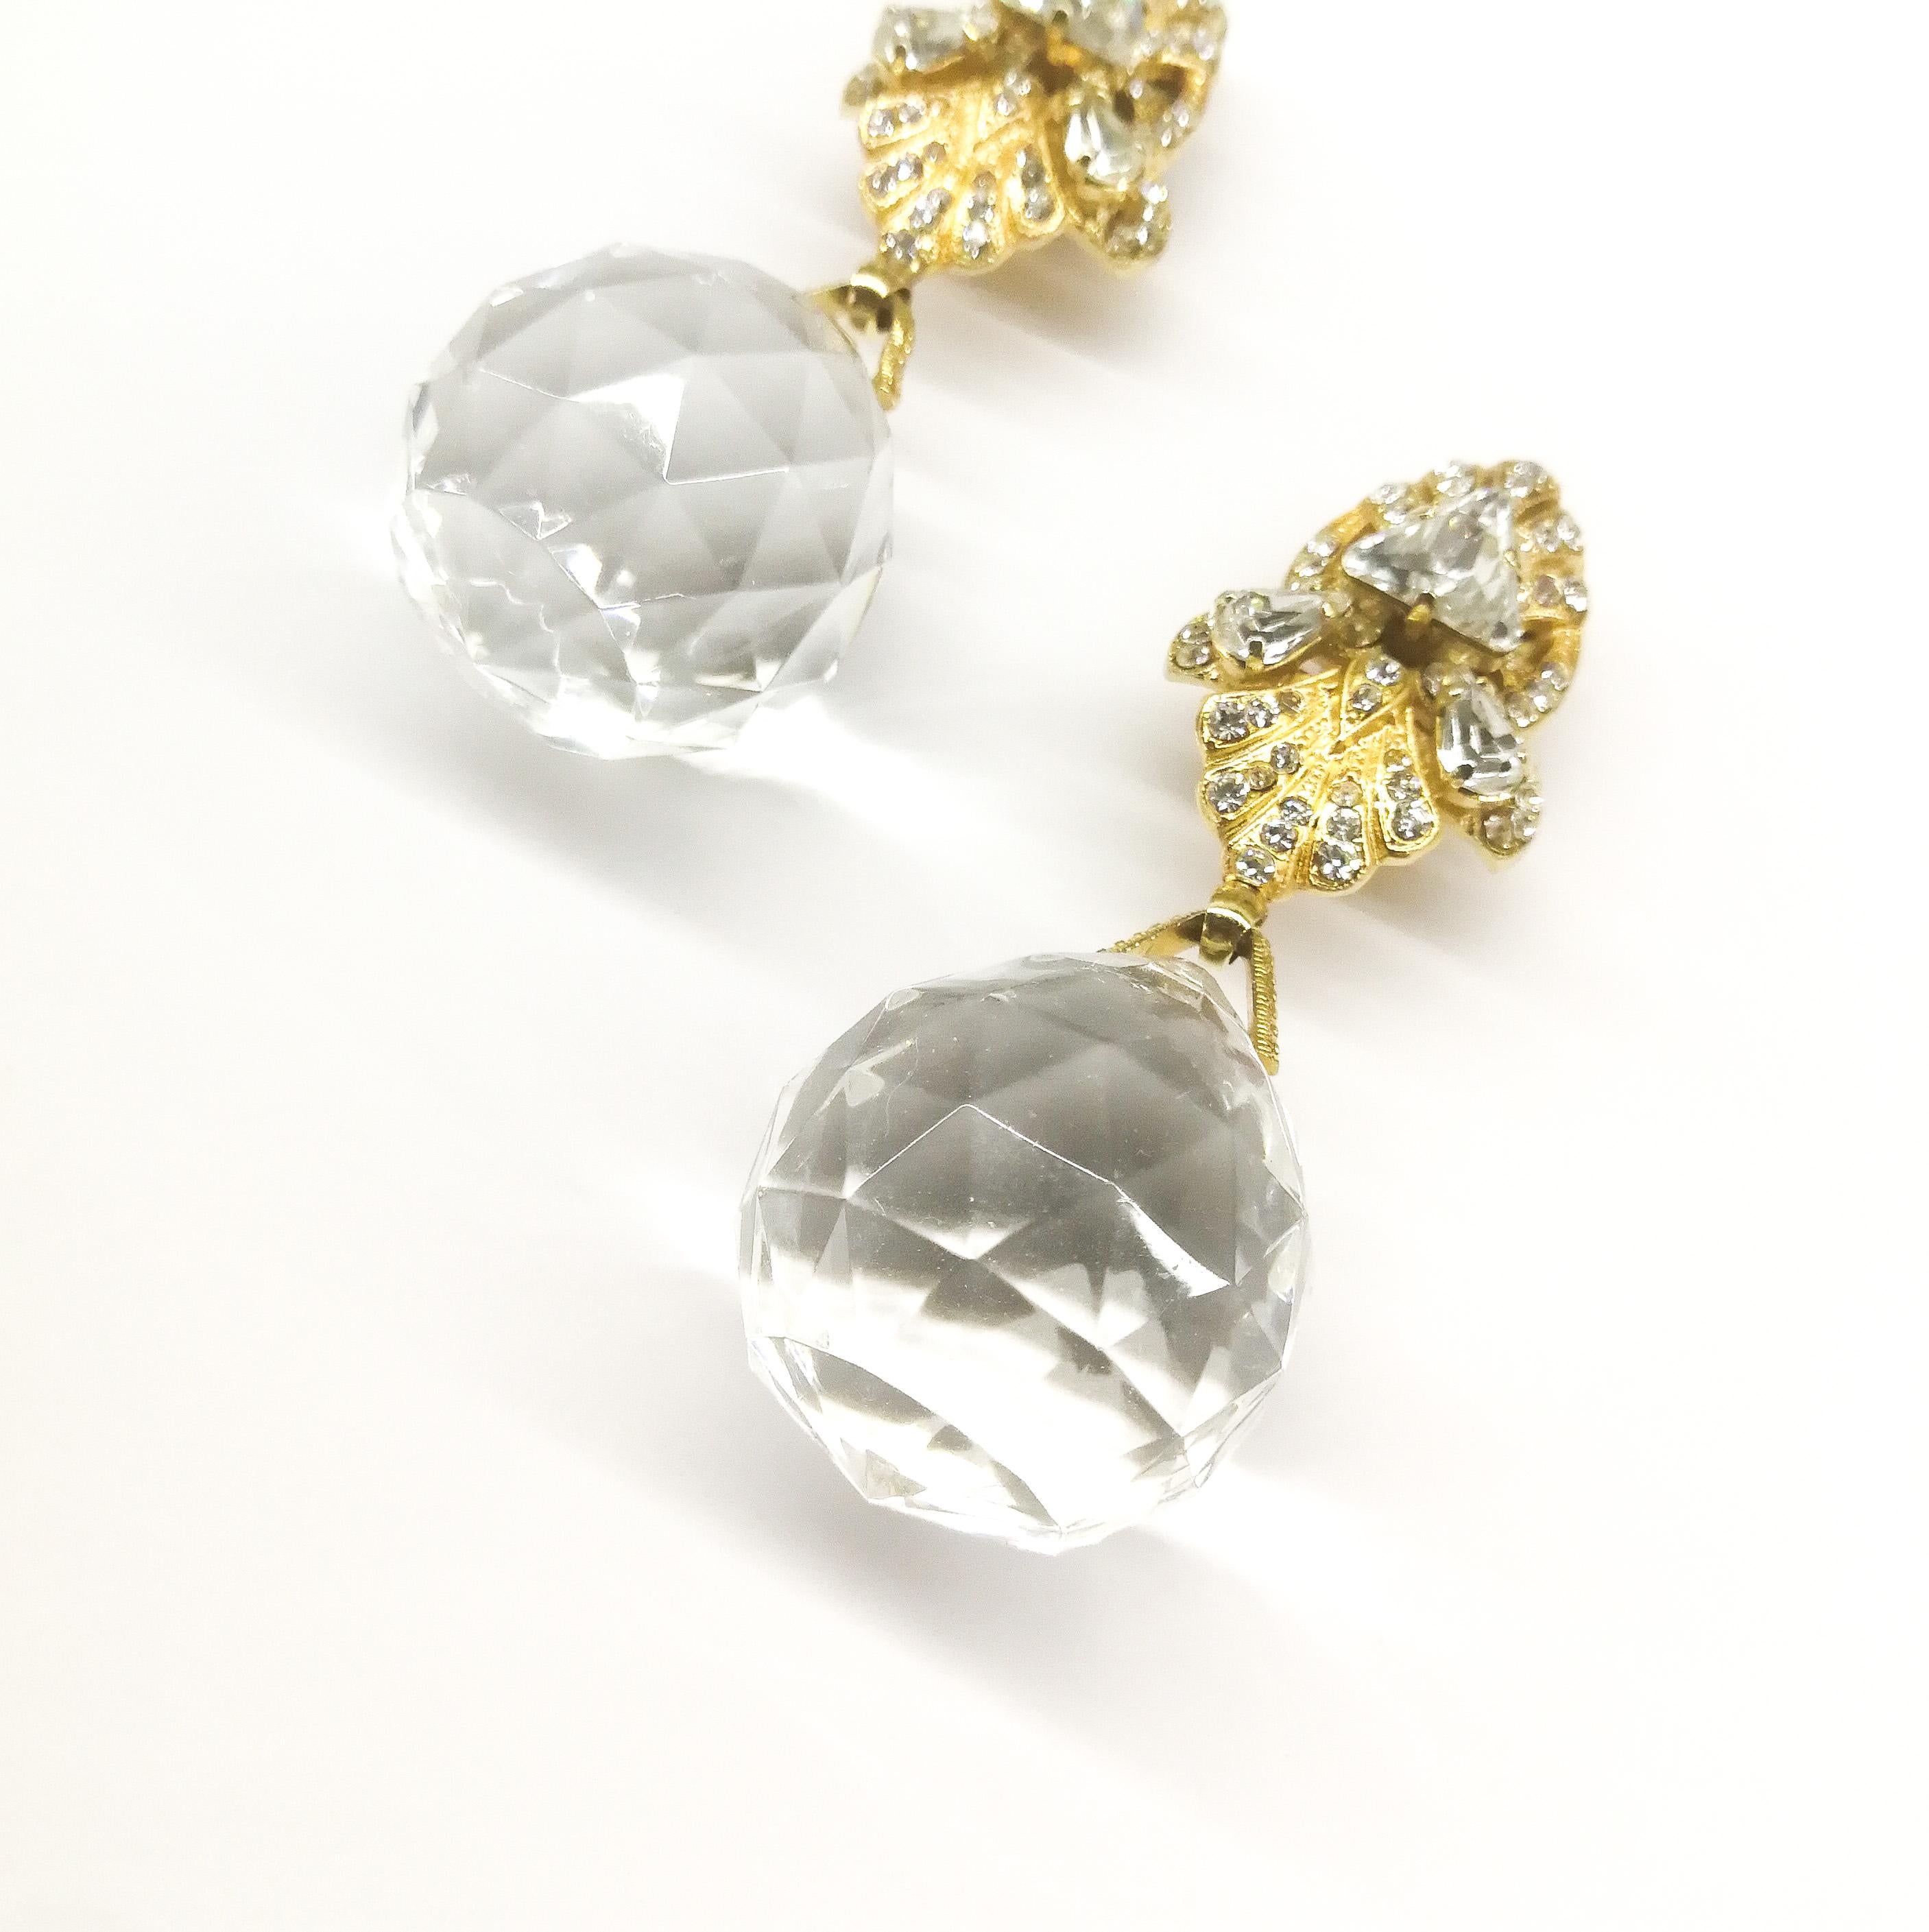 Women's Very large faceted faux crystal drop earrings, Gianfranco Ferre, Italy, 1990s. For Sale